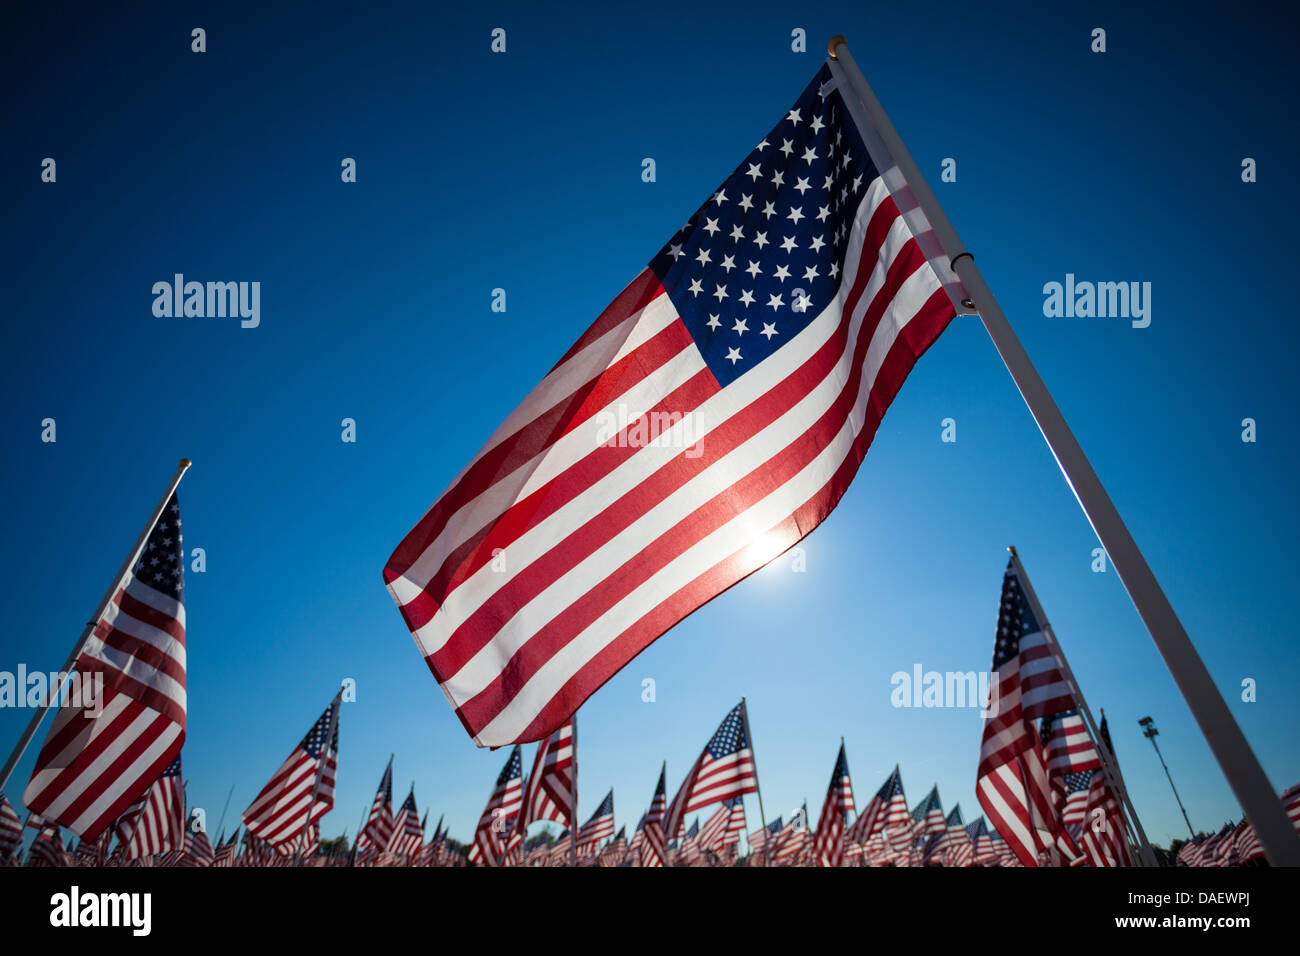 A display of many American flags with a sky blue background Stock Photo